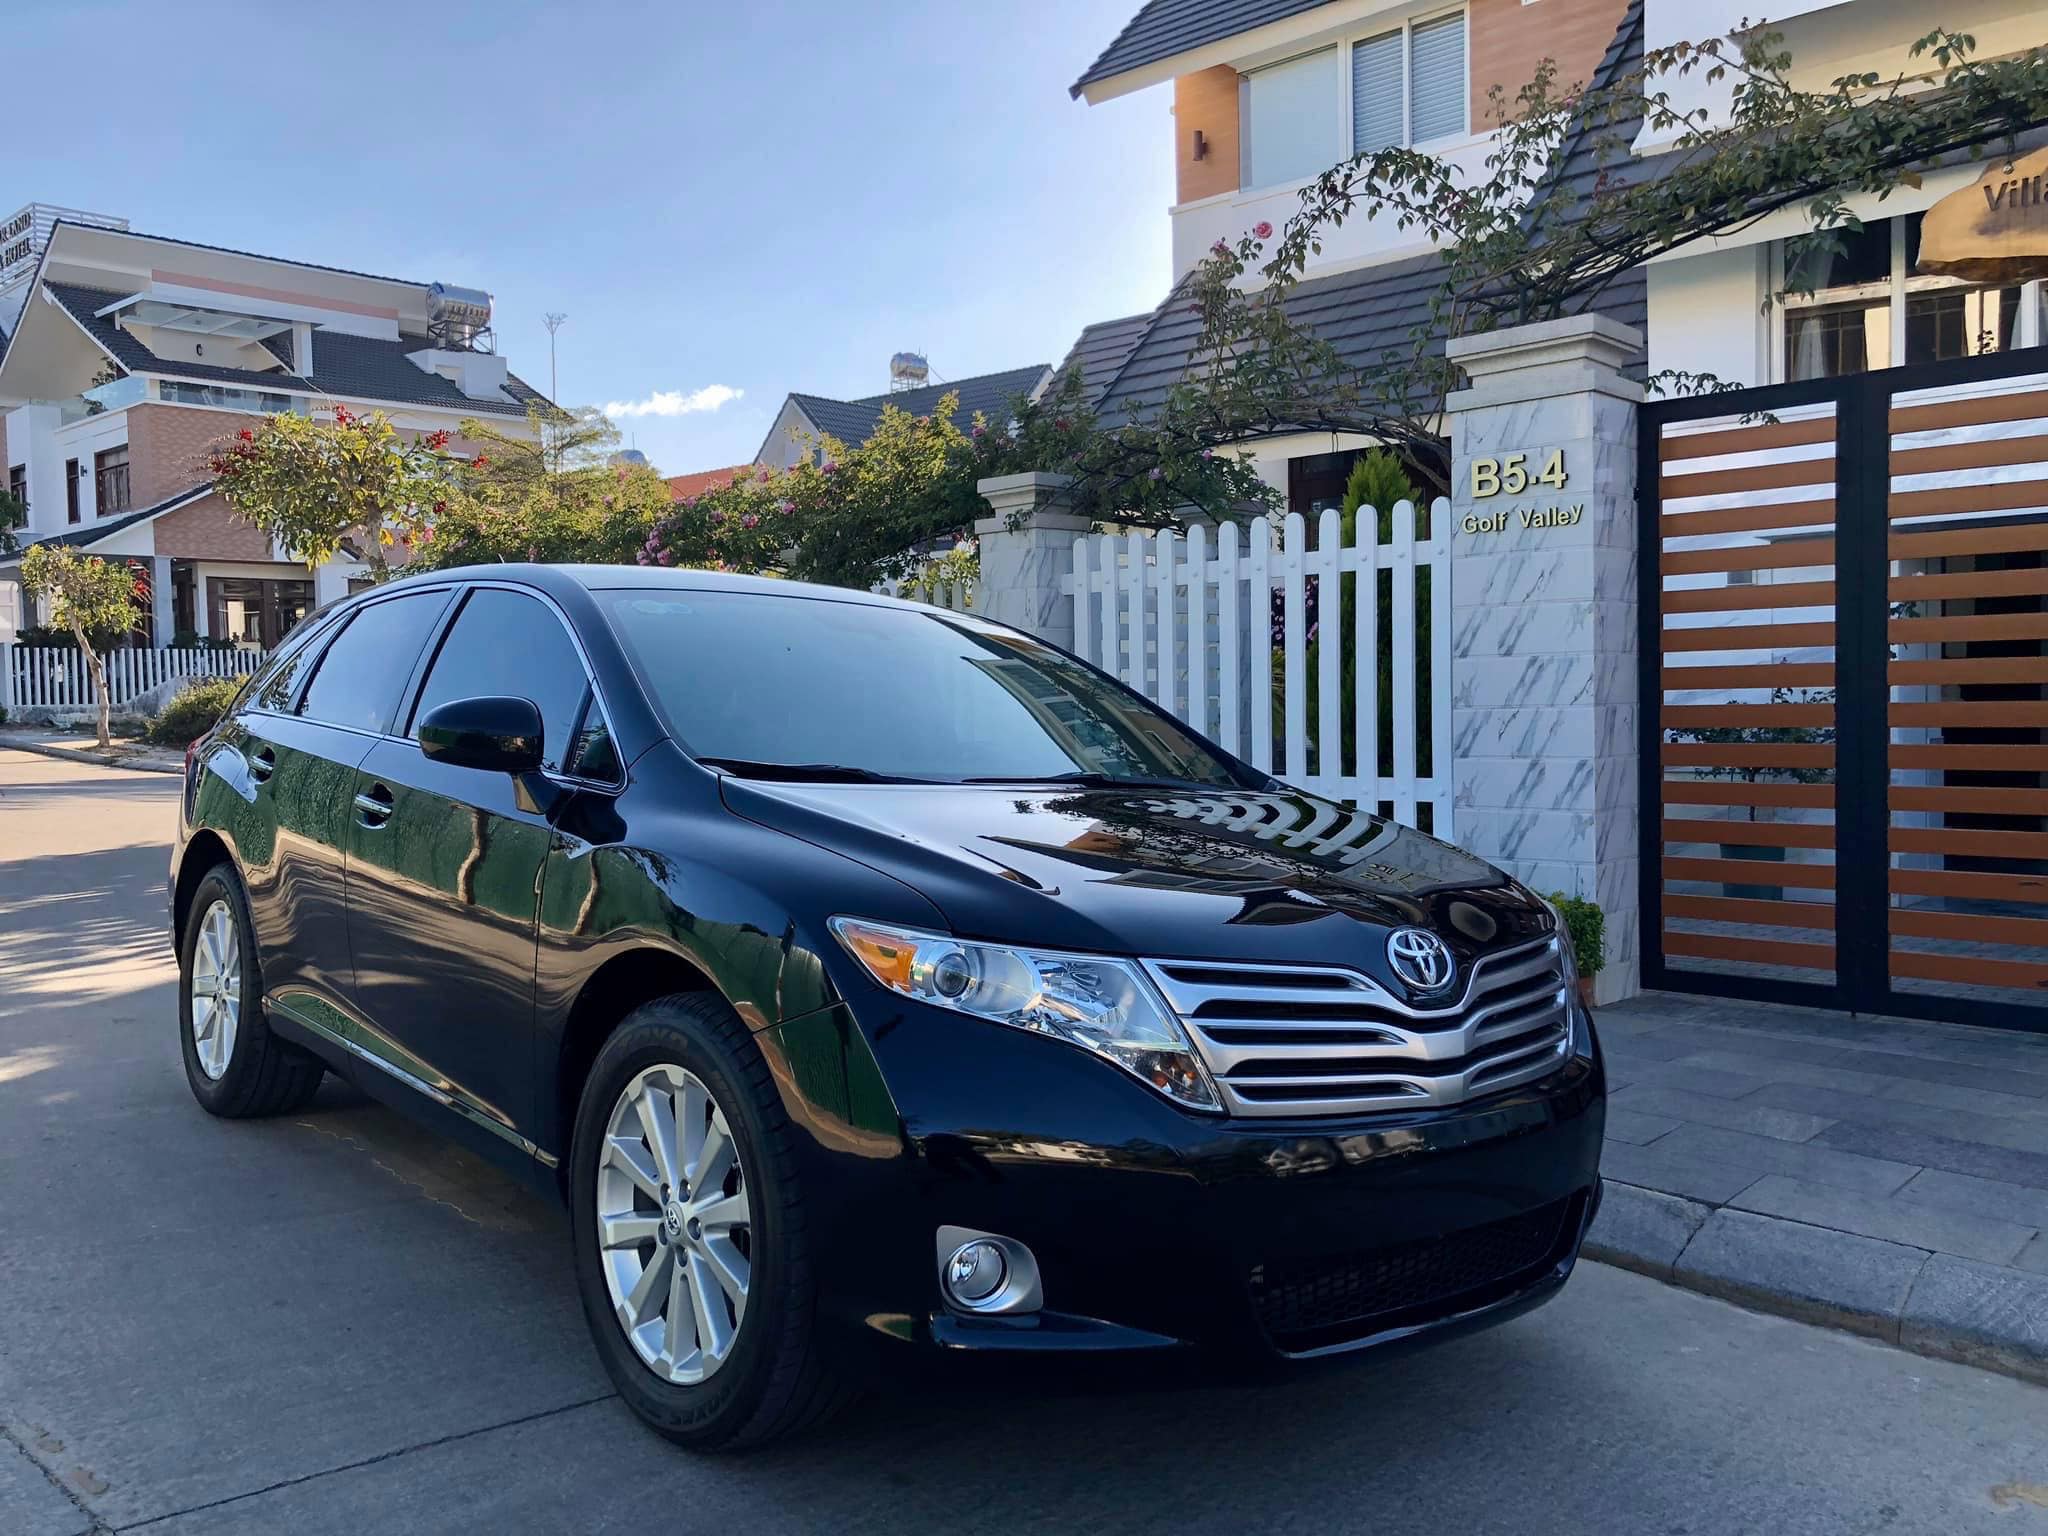 20092016 Toyota Venza problems fuel economy pros and cons AWD system